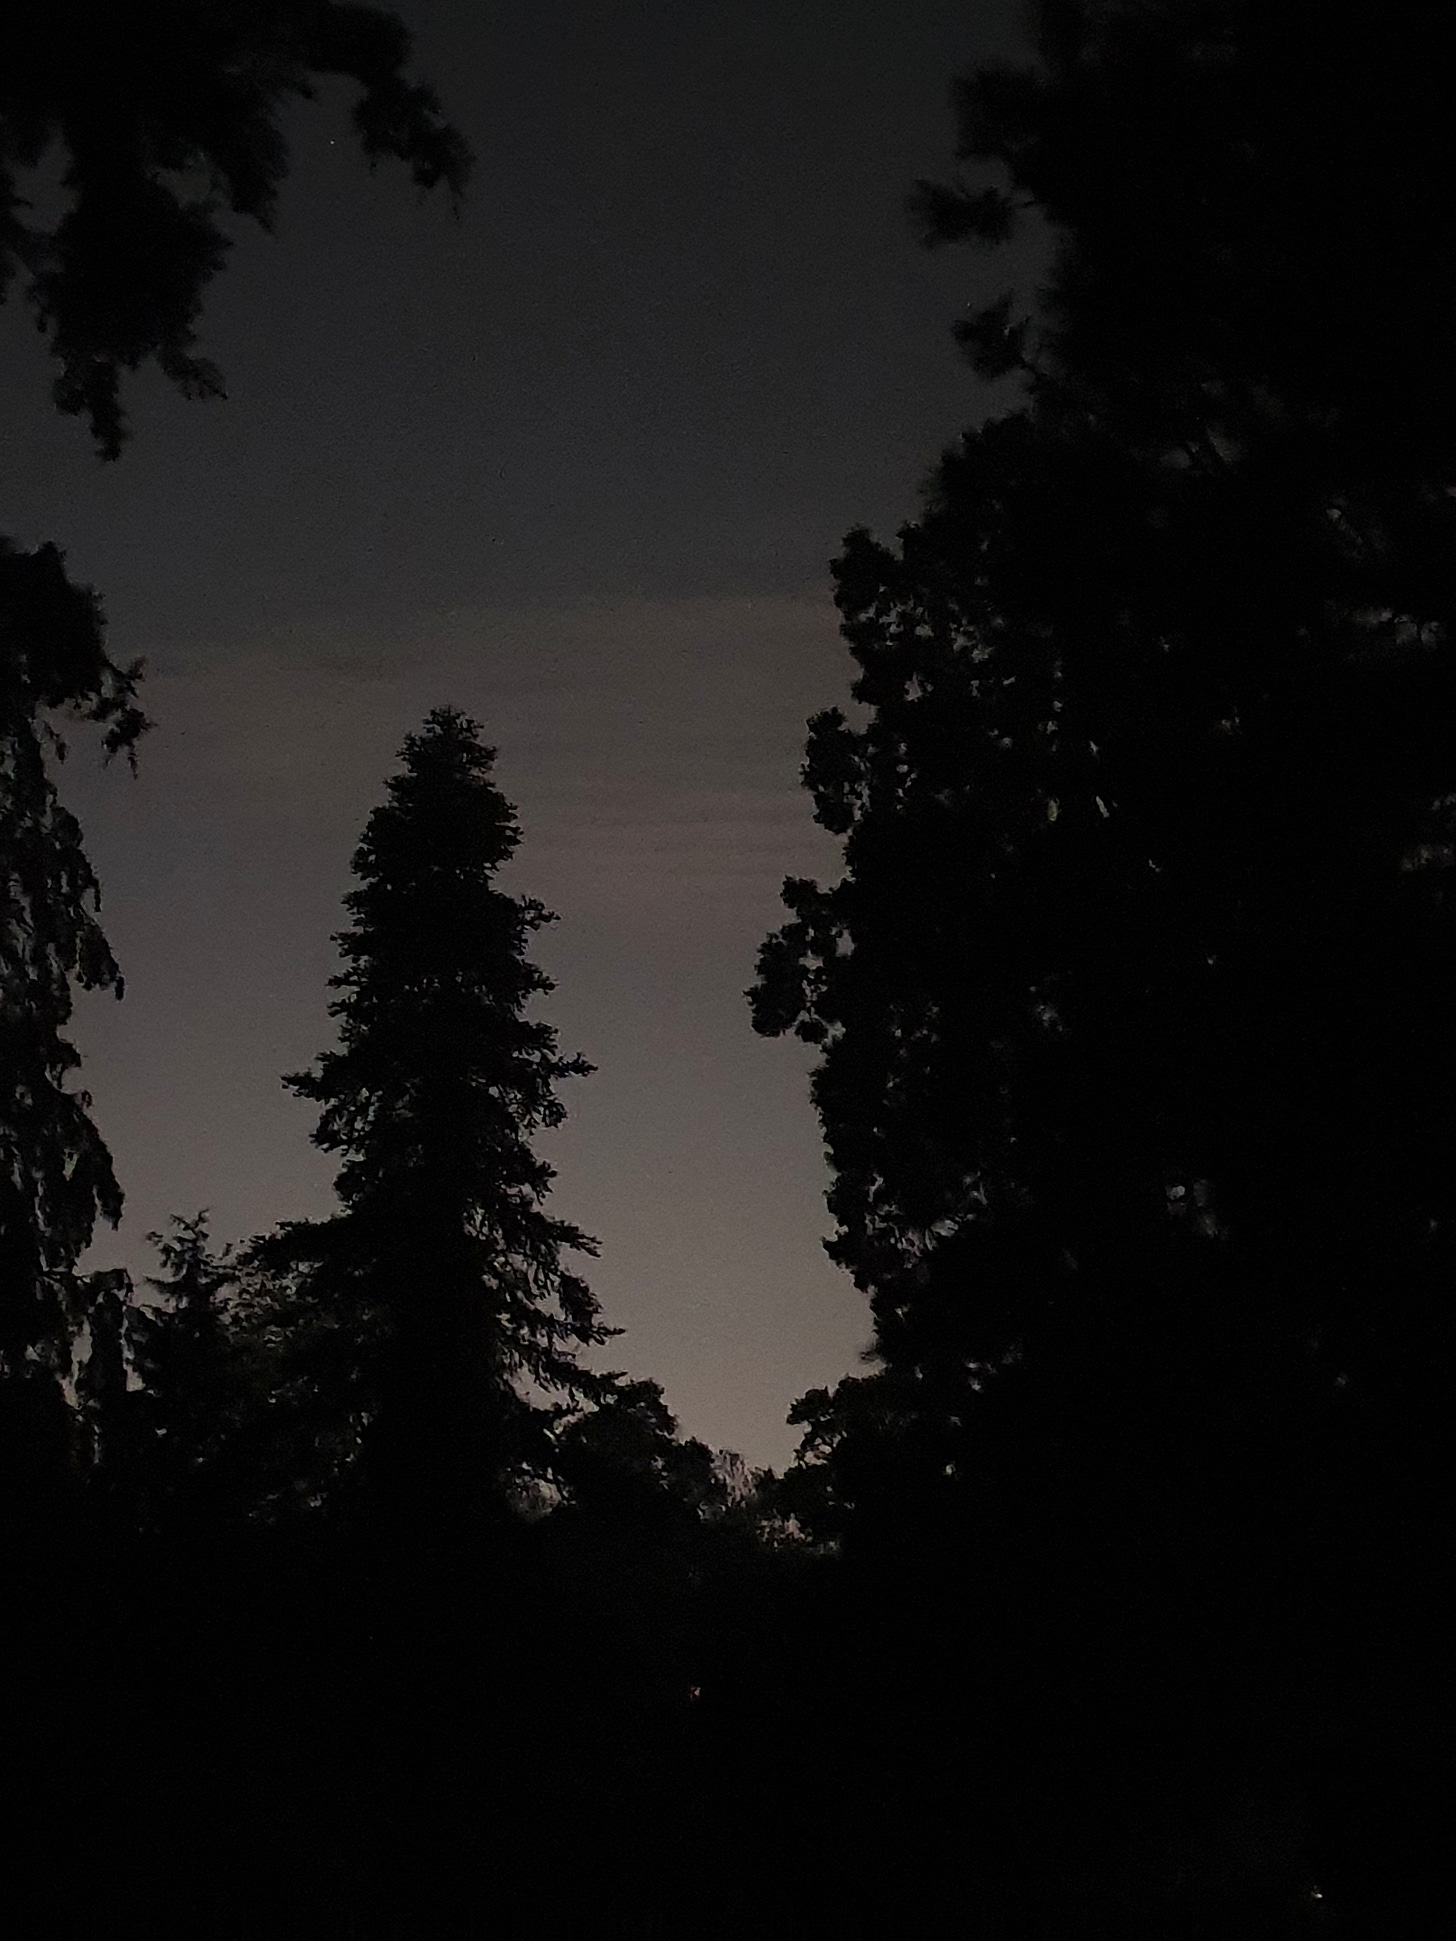 A photo of the night sky seen through a break in the trees